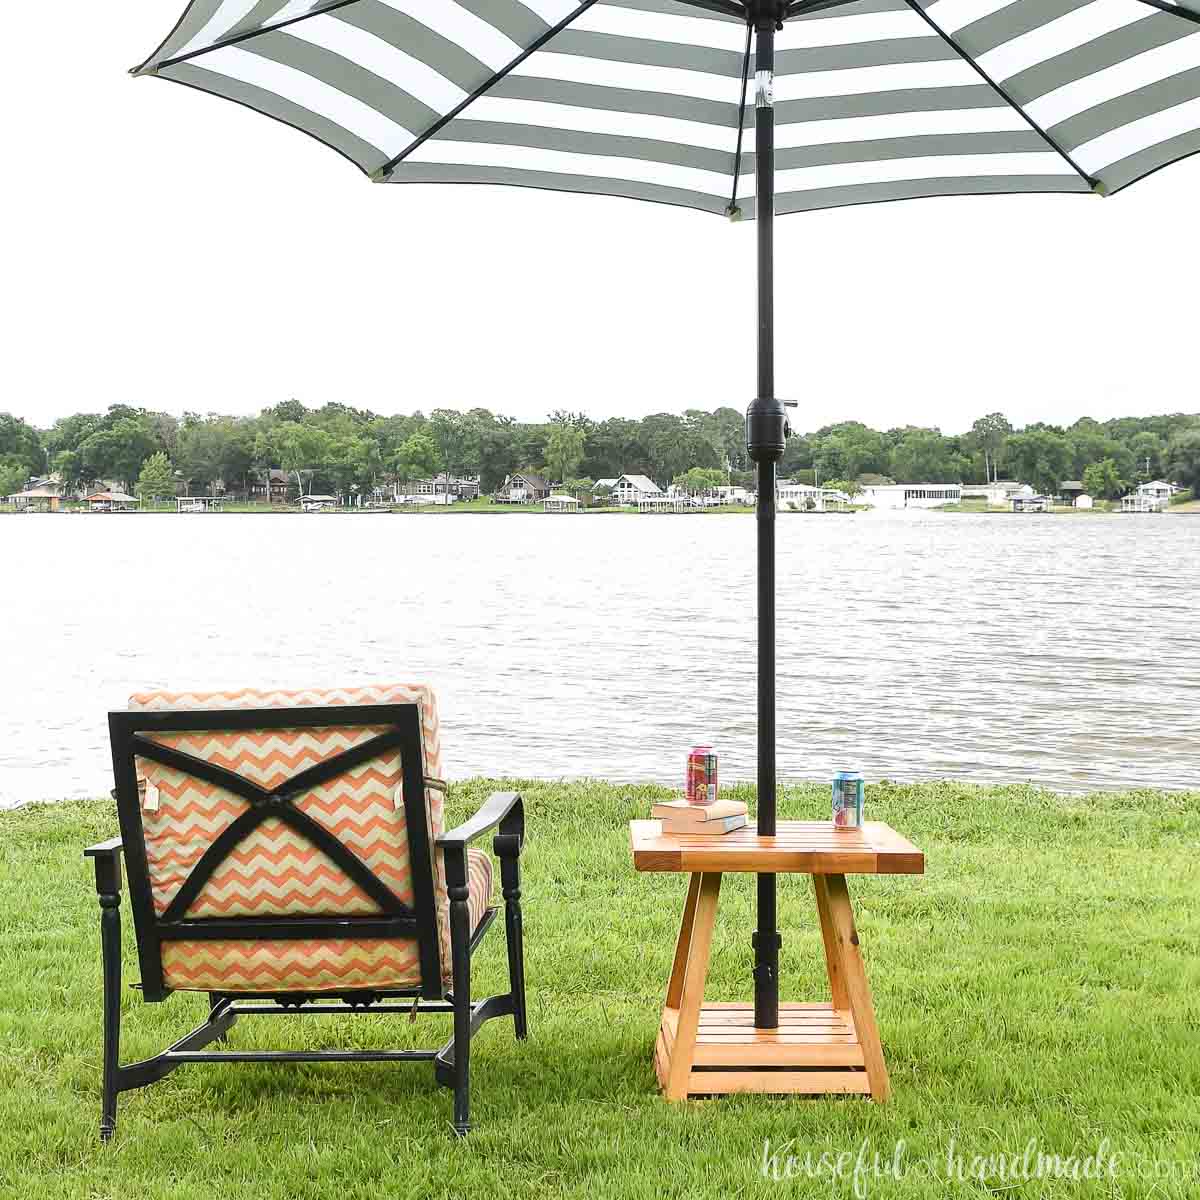 DIY umbrella side table with black and white striped umbrella in it and outdoor chair with cushions next to it looking over a lake.